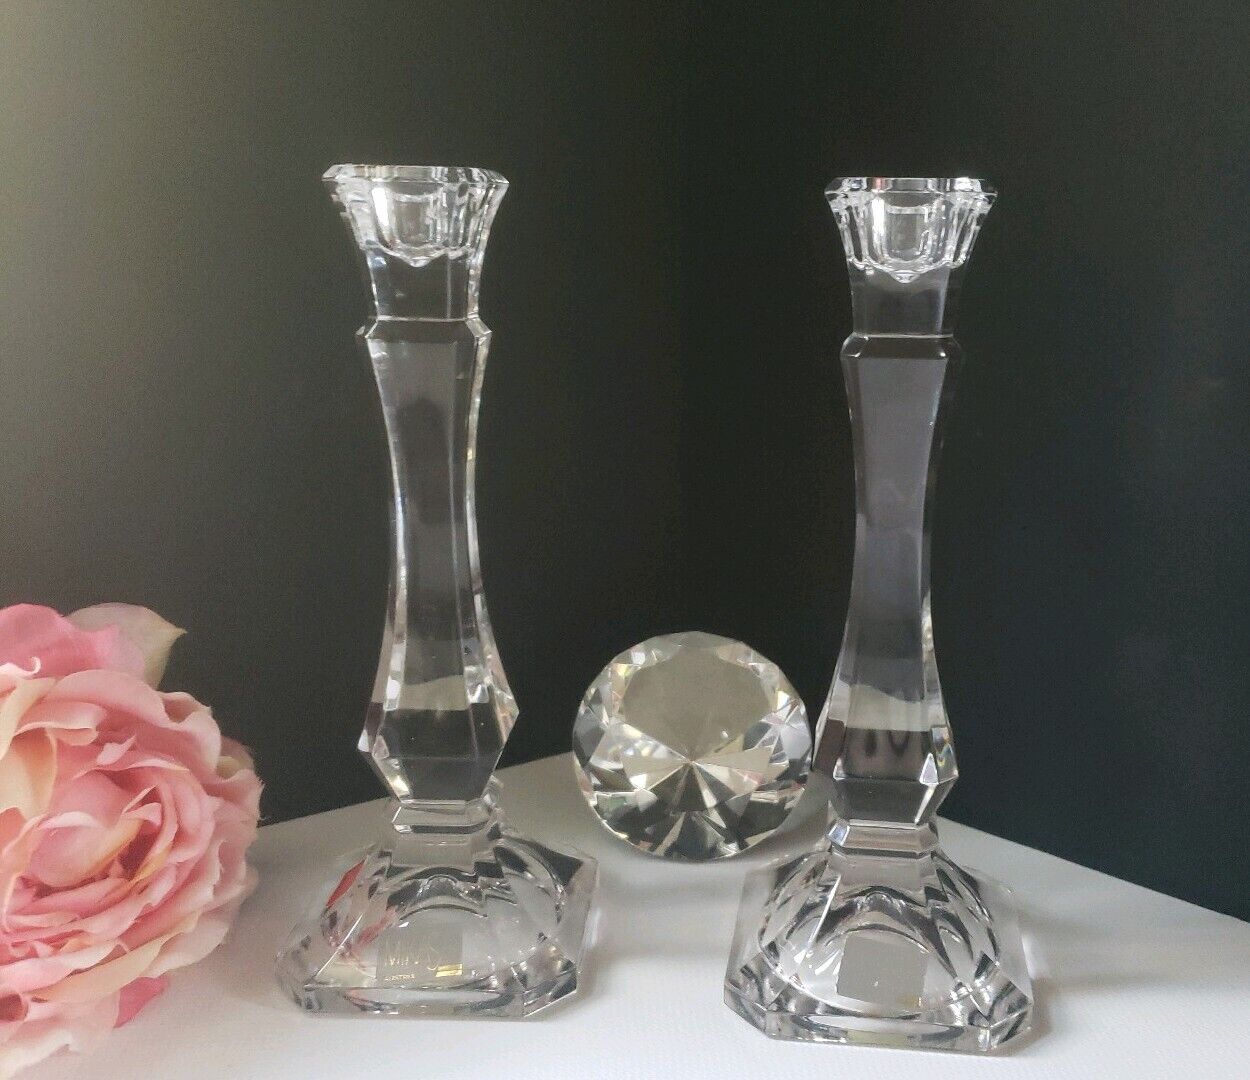 Mikasa - Pair of Lead Crystal Candle Holders  Made in Austria - NEW/DISPLAY ITEM Mikasa - фотография #11